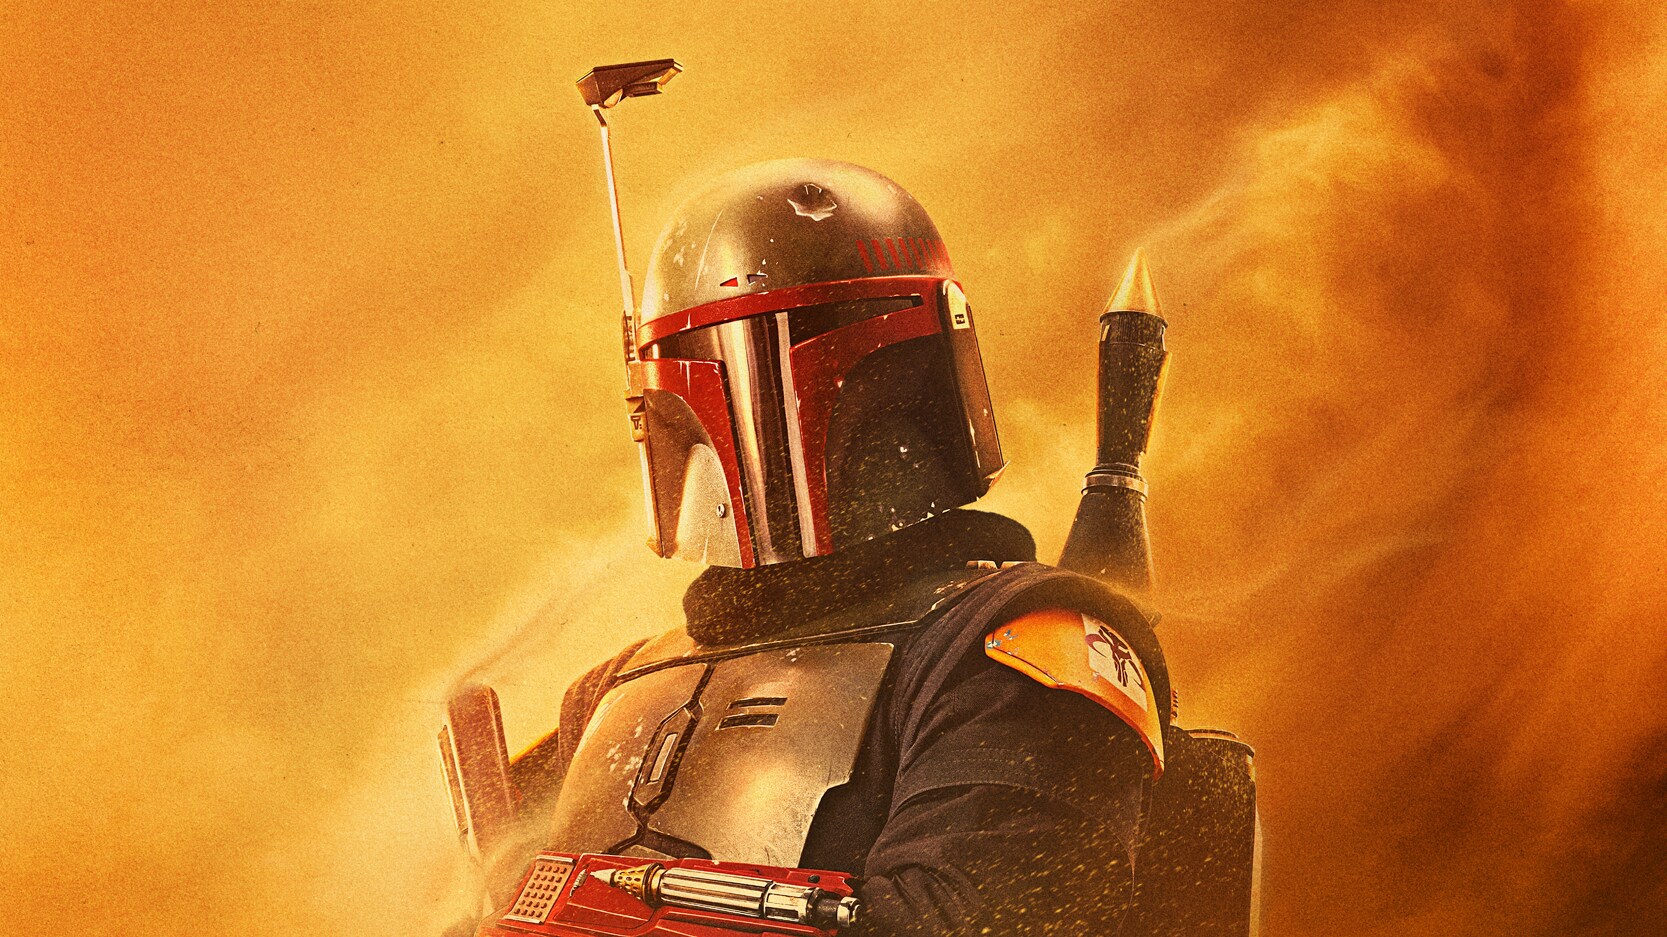 Disney+ Unveils Character Posters And Debuts New TV Spot For “The Book Of Boba Fett”